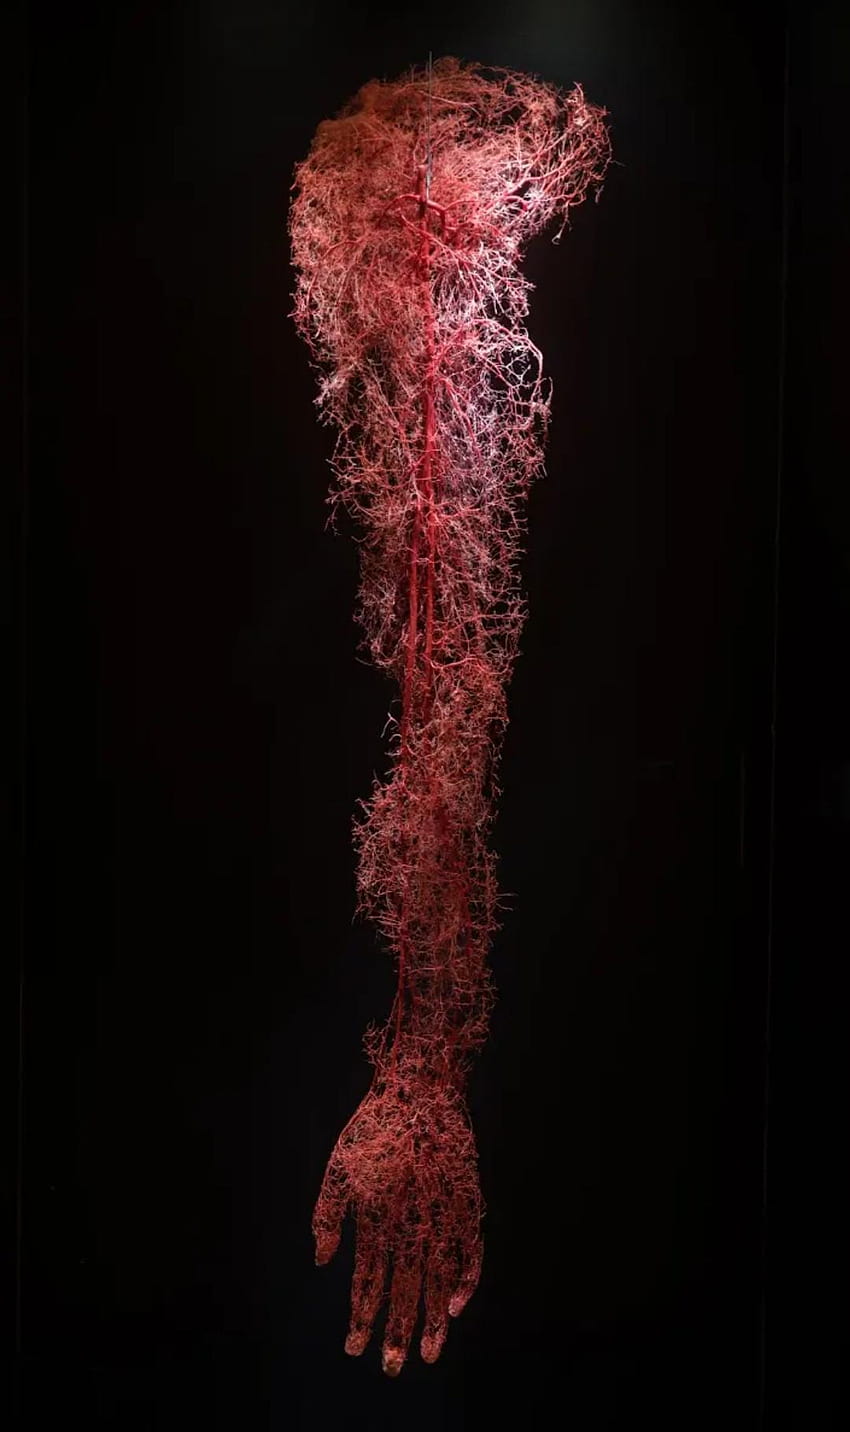 Thought this would look good as a : Note10, circulatory system HD phone wallpaper